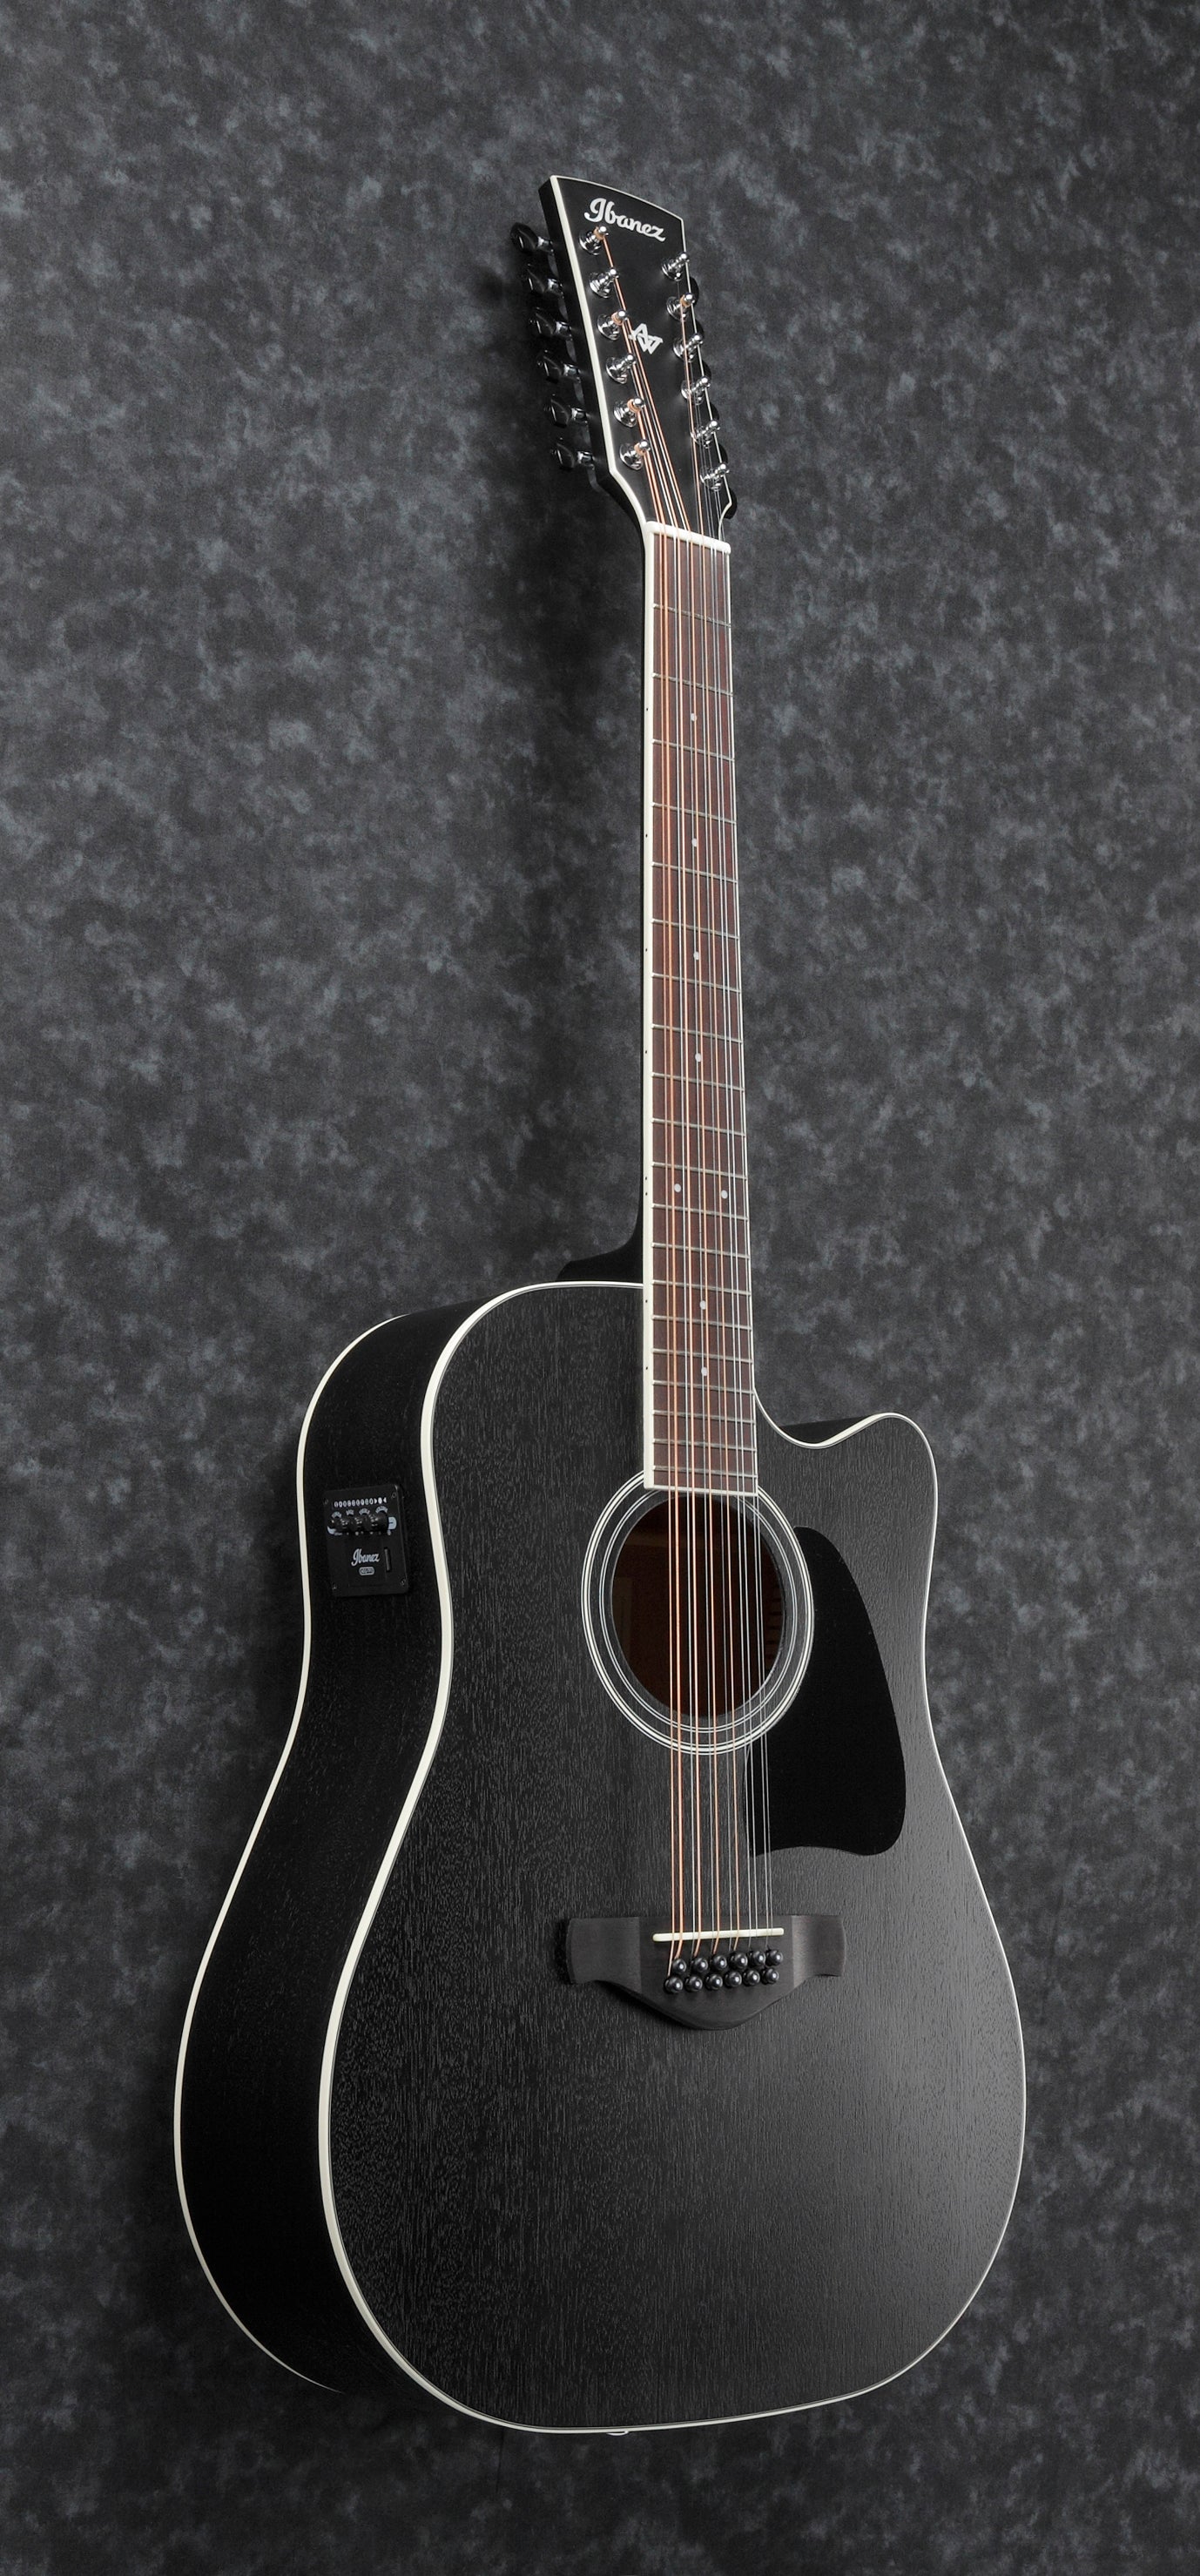 Ibanez AW8412CE Acoustic Guitar (Weathered Black Open Pore)